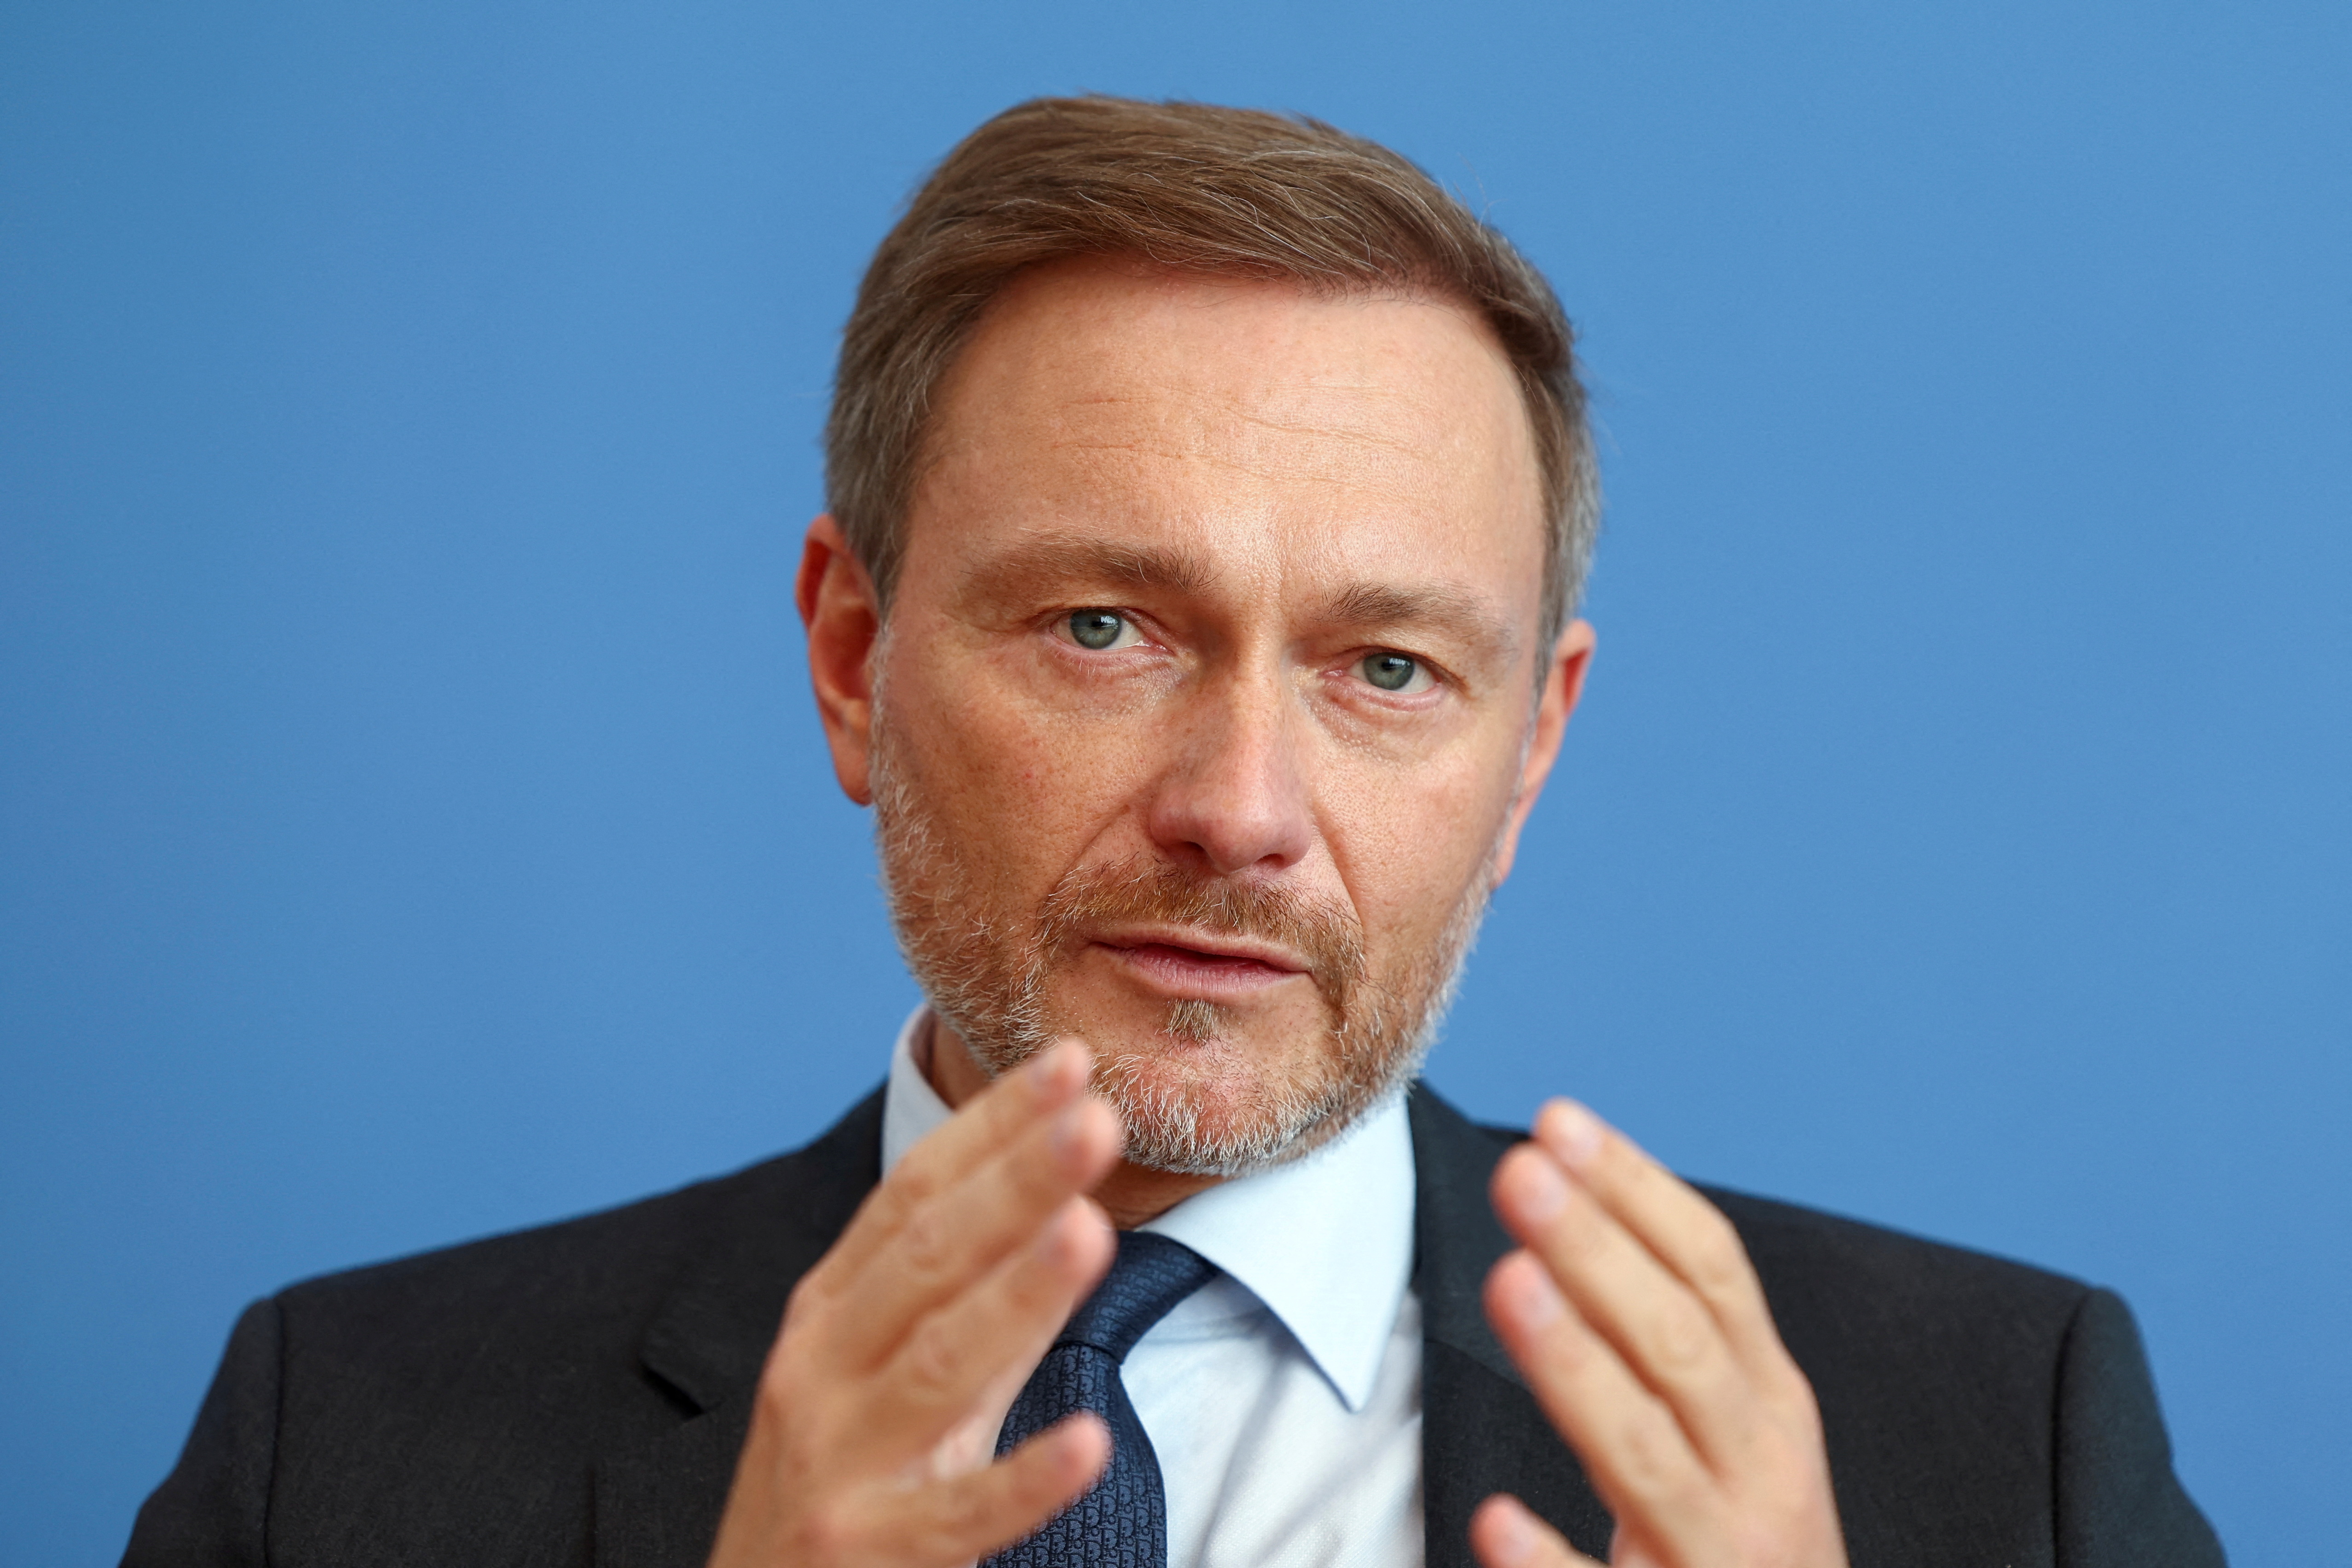 Germany's FM Christian Lindner holds a news conference on German budget plans in Berlin